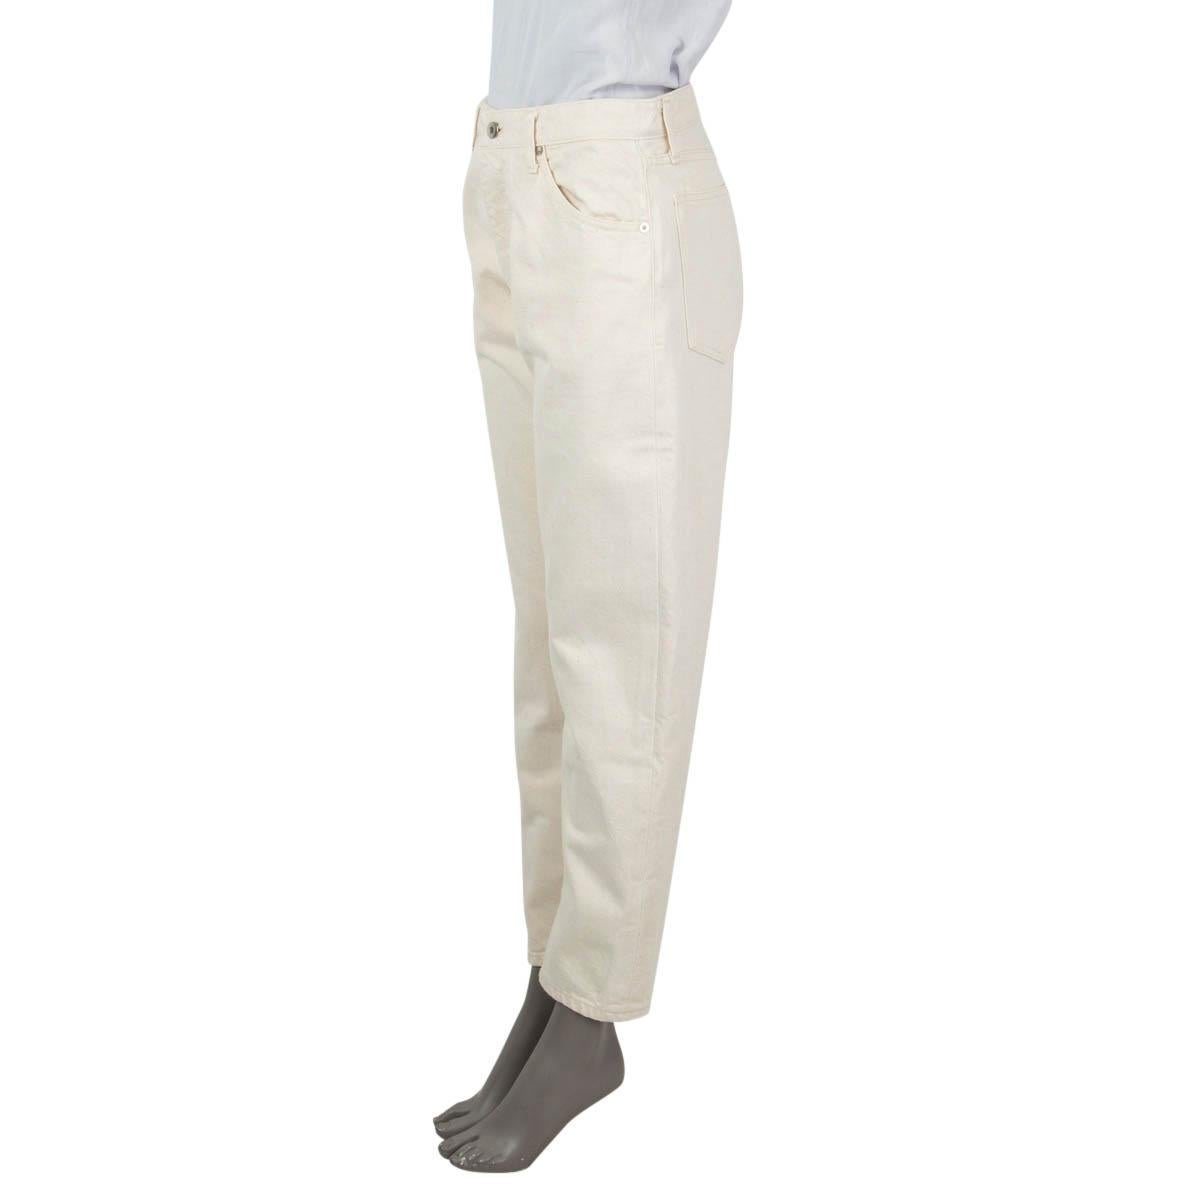 100% authentic Jil Sander + 90s cut high waisted jeans in creme white cotton (100%). Open with a zipper and one button in the front. Feature a high waist cut, belt loops, two rounded slit pockets on the front, two slit pockets on the back and a